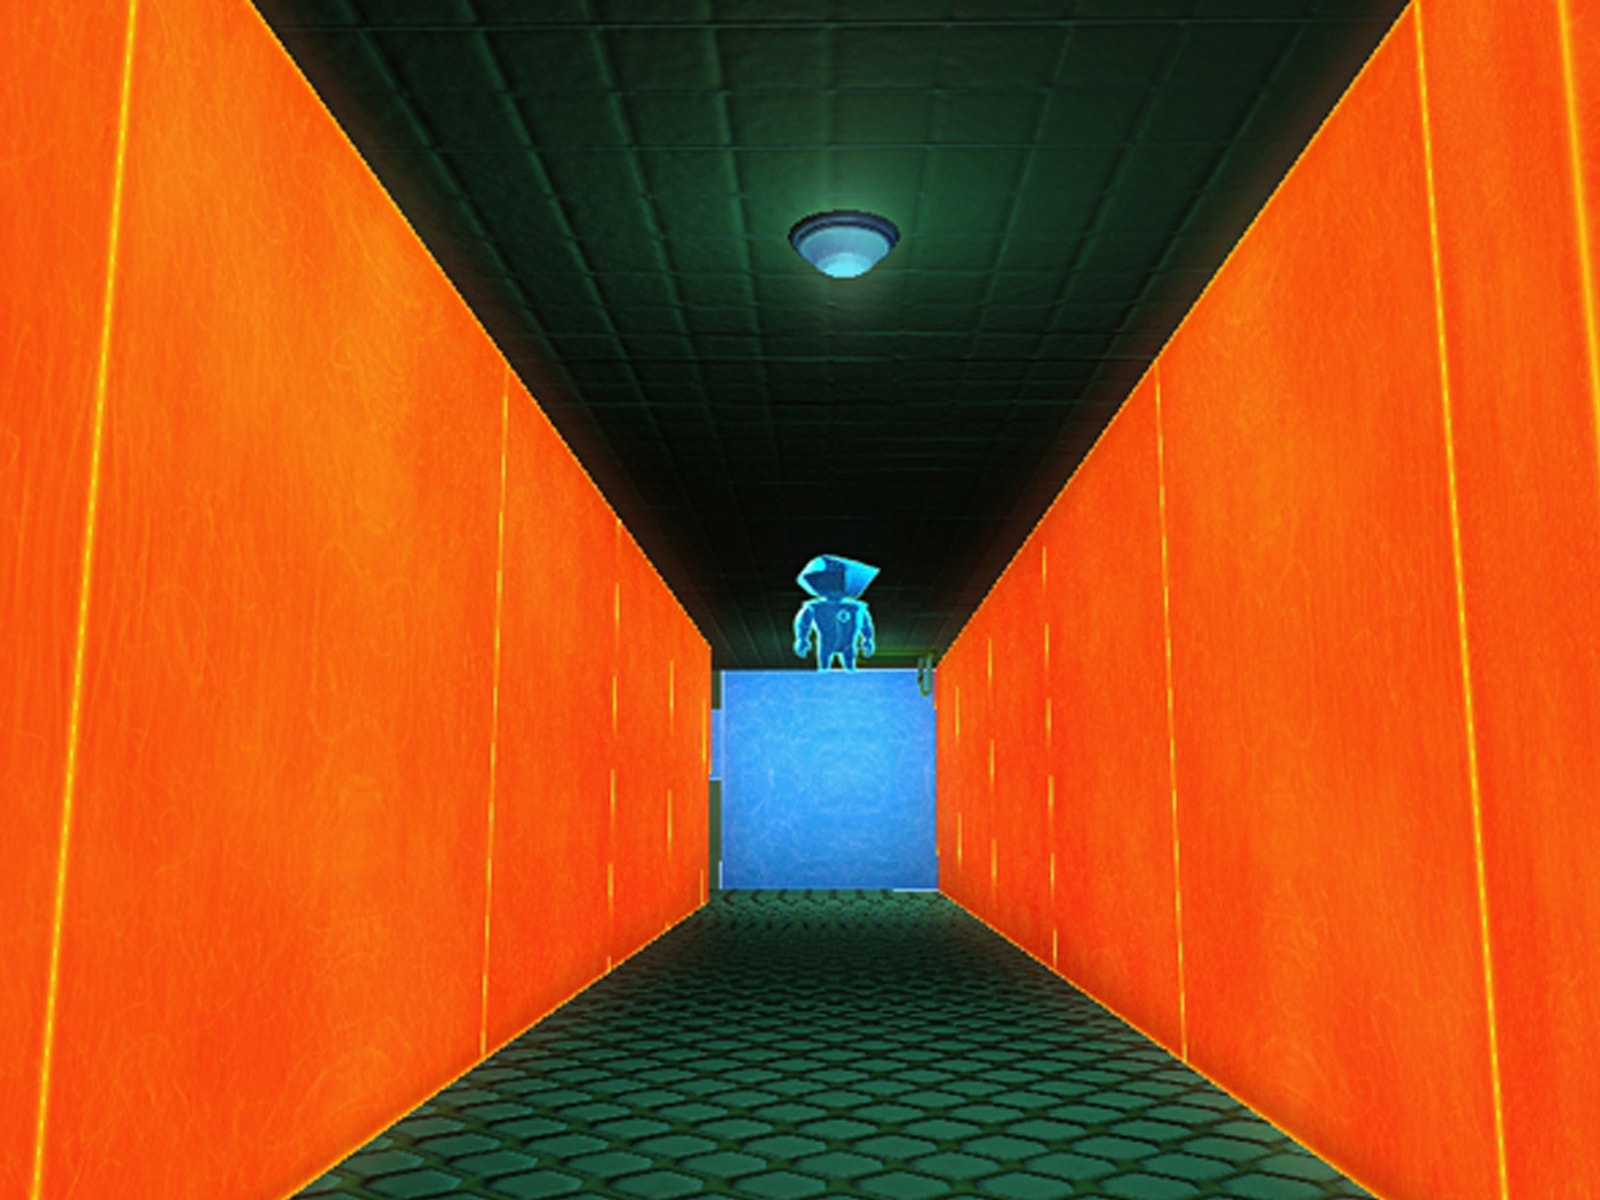 Screenshot from DigiPen student game Perspective of a character gazing down an orange-walled hallway